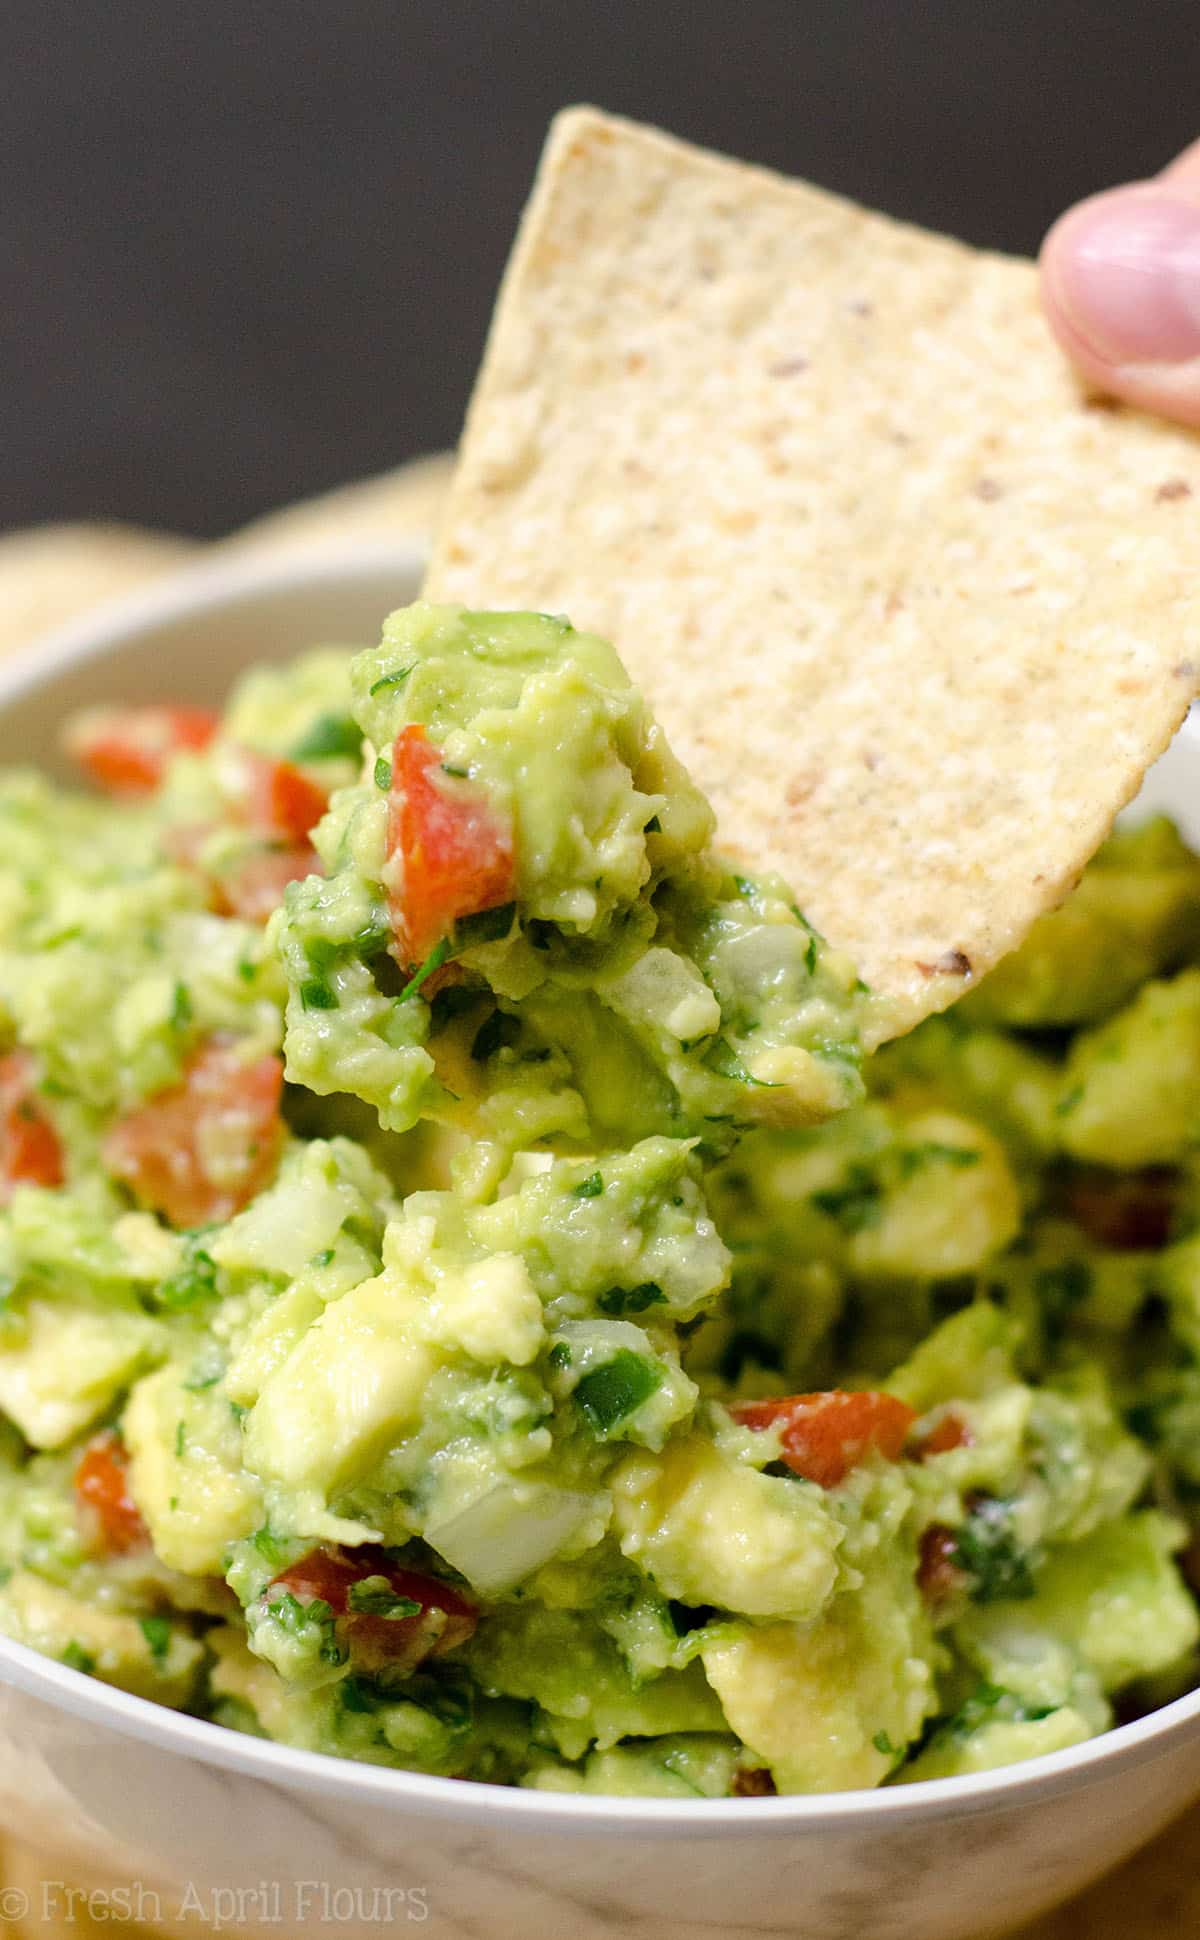 Homemade Guacamole: The secret to making amazing chunky guacamole at home is all in the preparation of the tomato. Find out the best way to create delicious guac in your own kitchen!